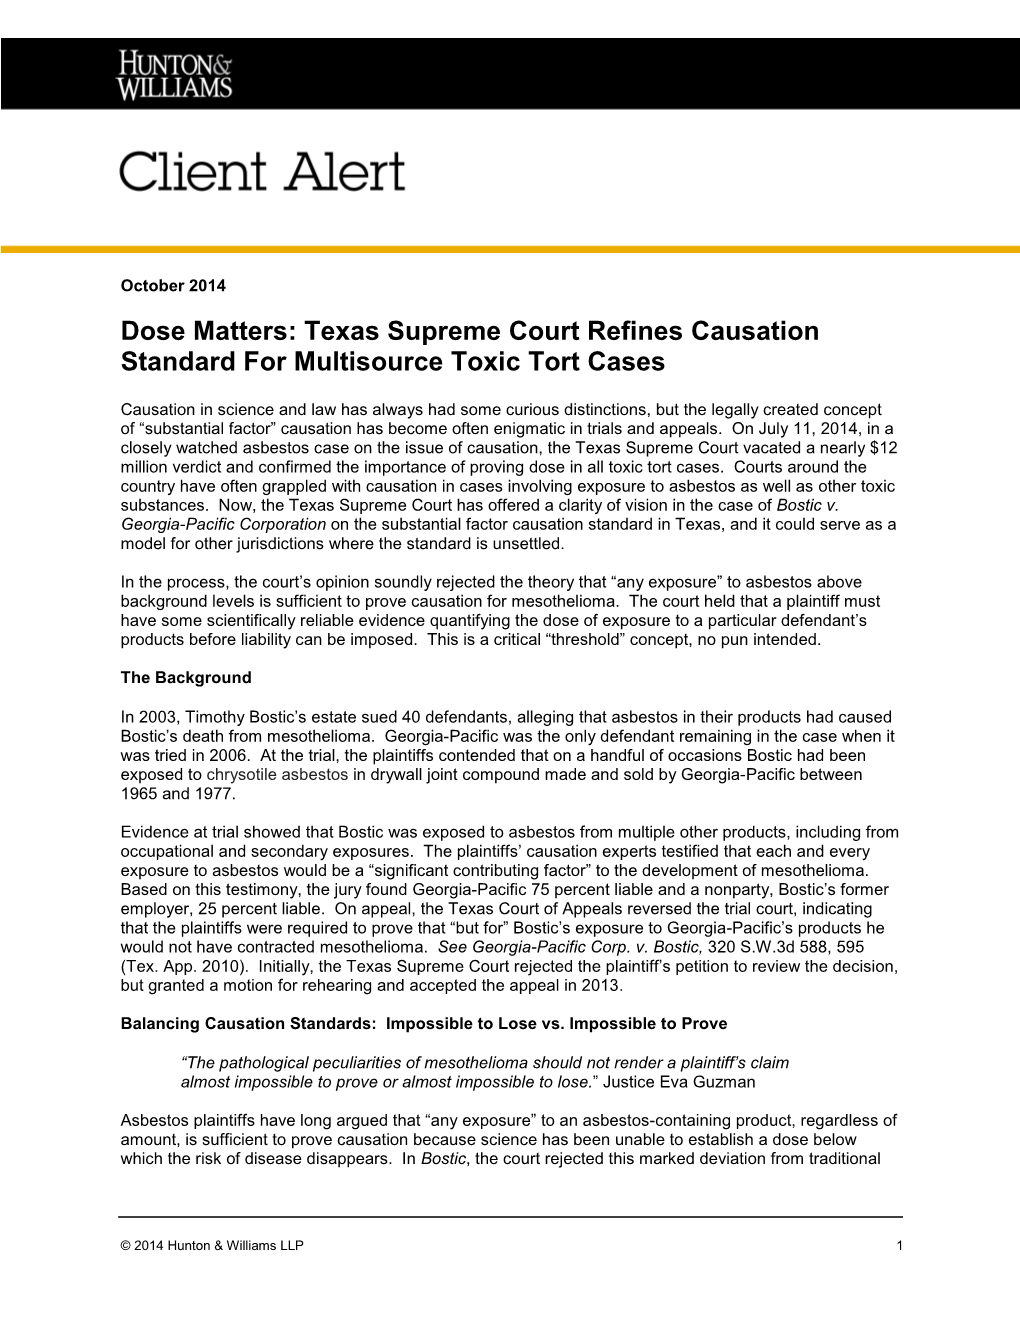 Dose Matters: Texas Supreme Court Refines Causation Standard for Multisource Toxic Tort Cases